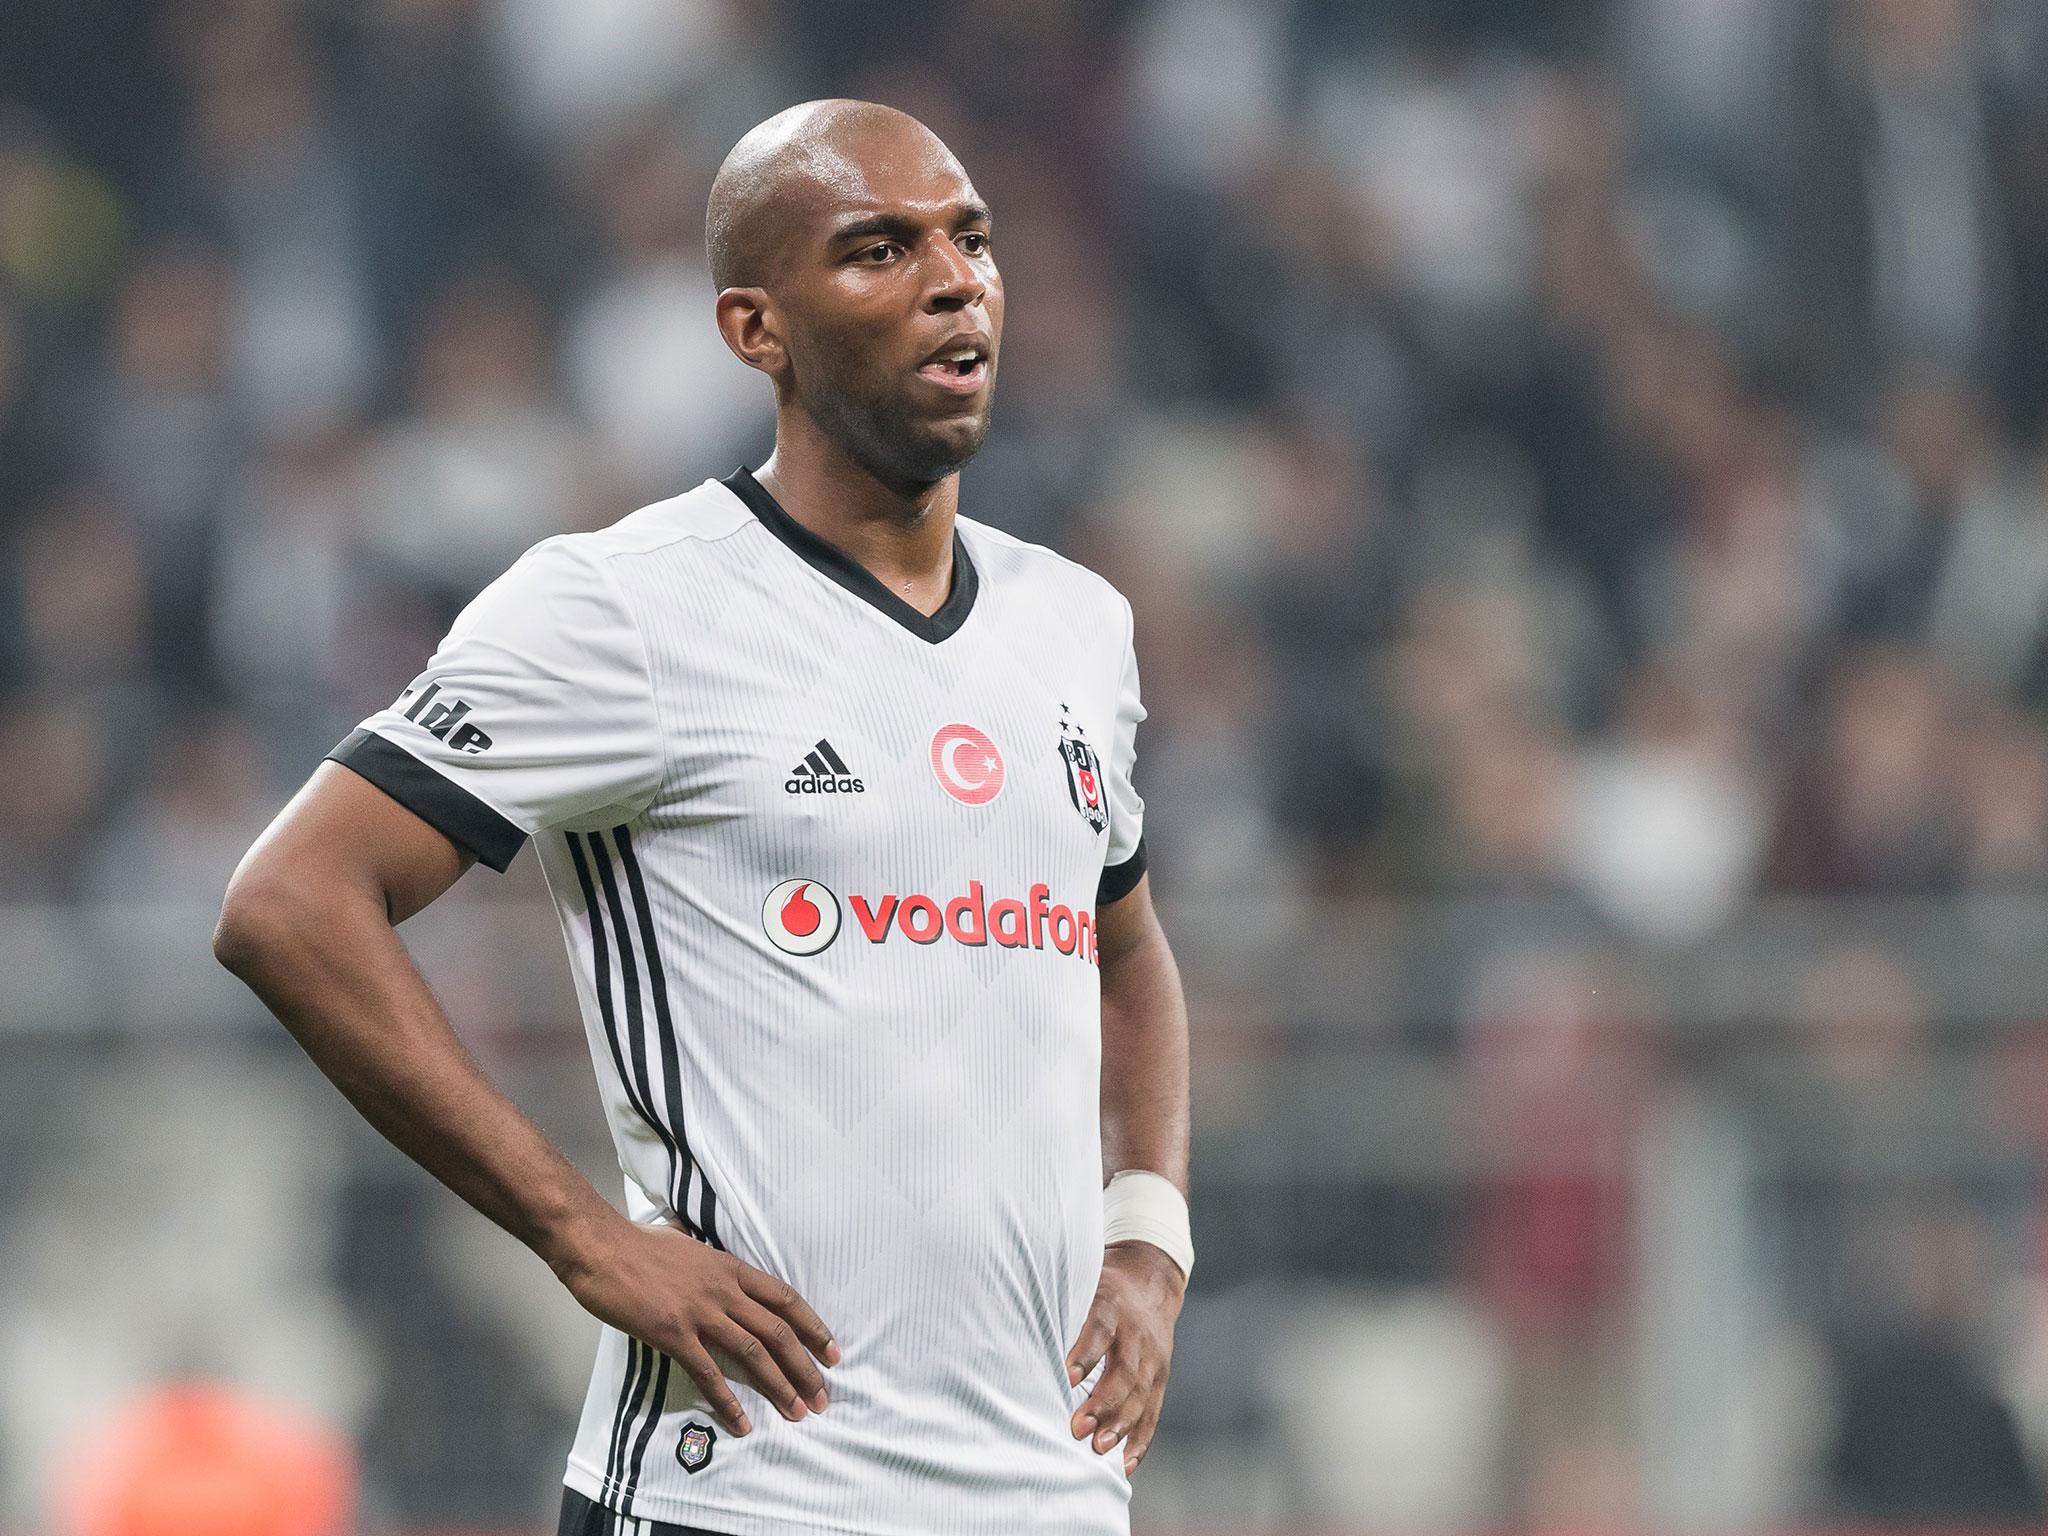 Ryan Babel has helped take Besiktas to the brink of the Champions League last-16